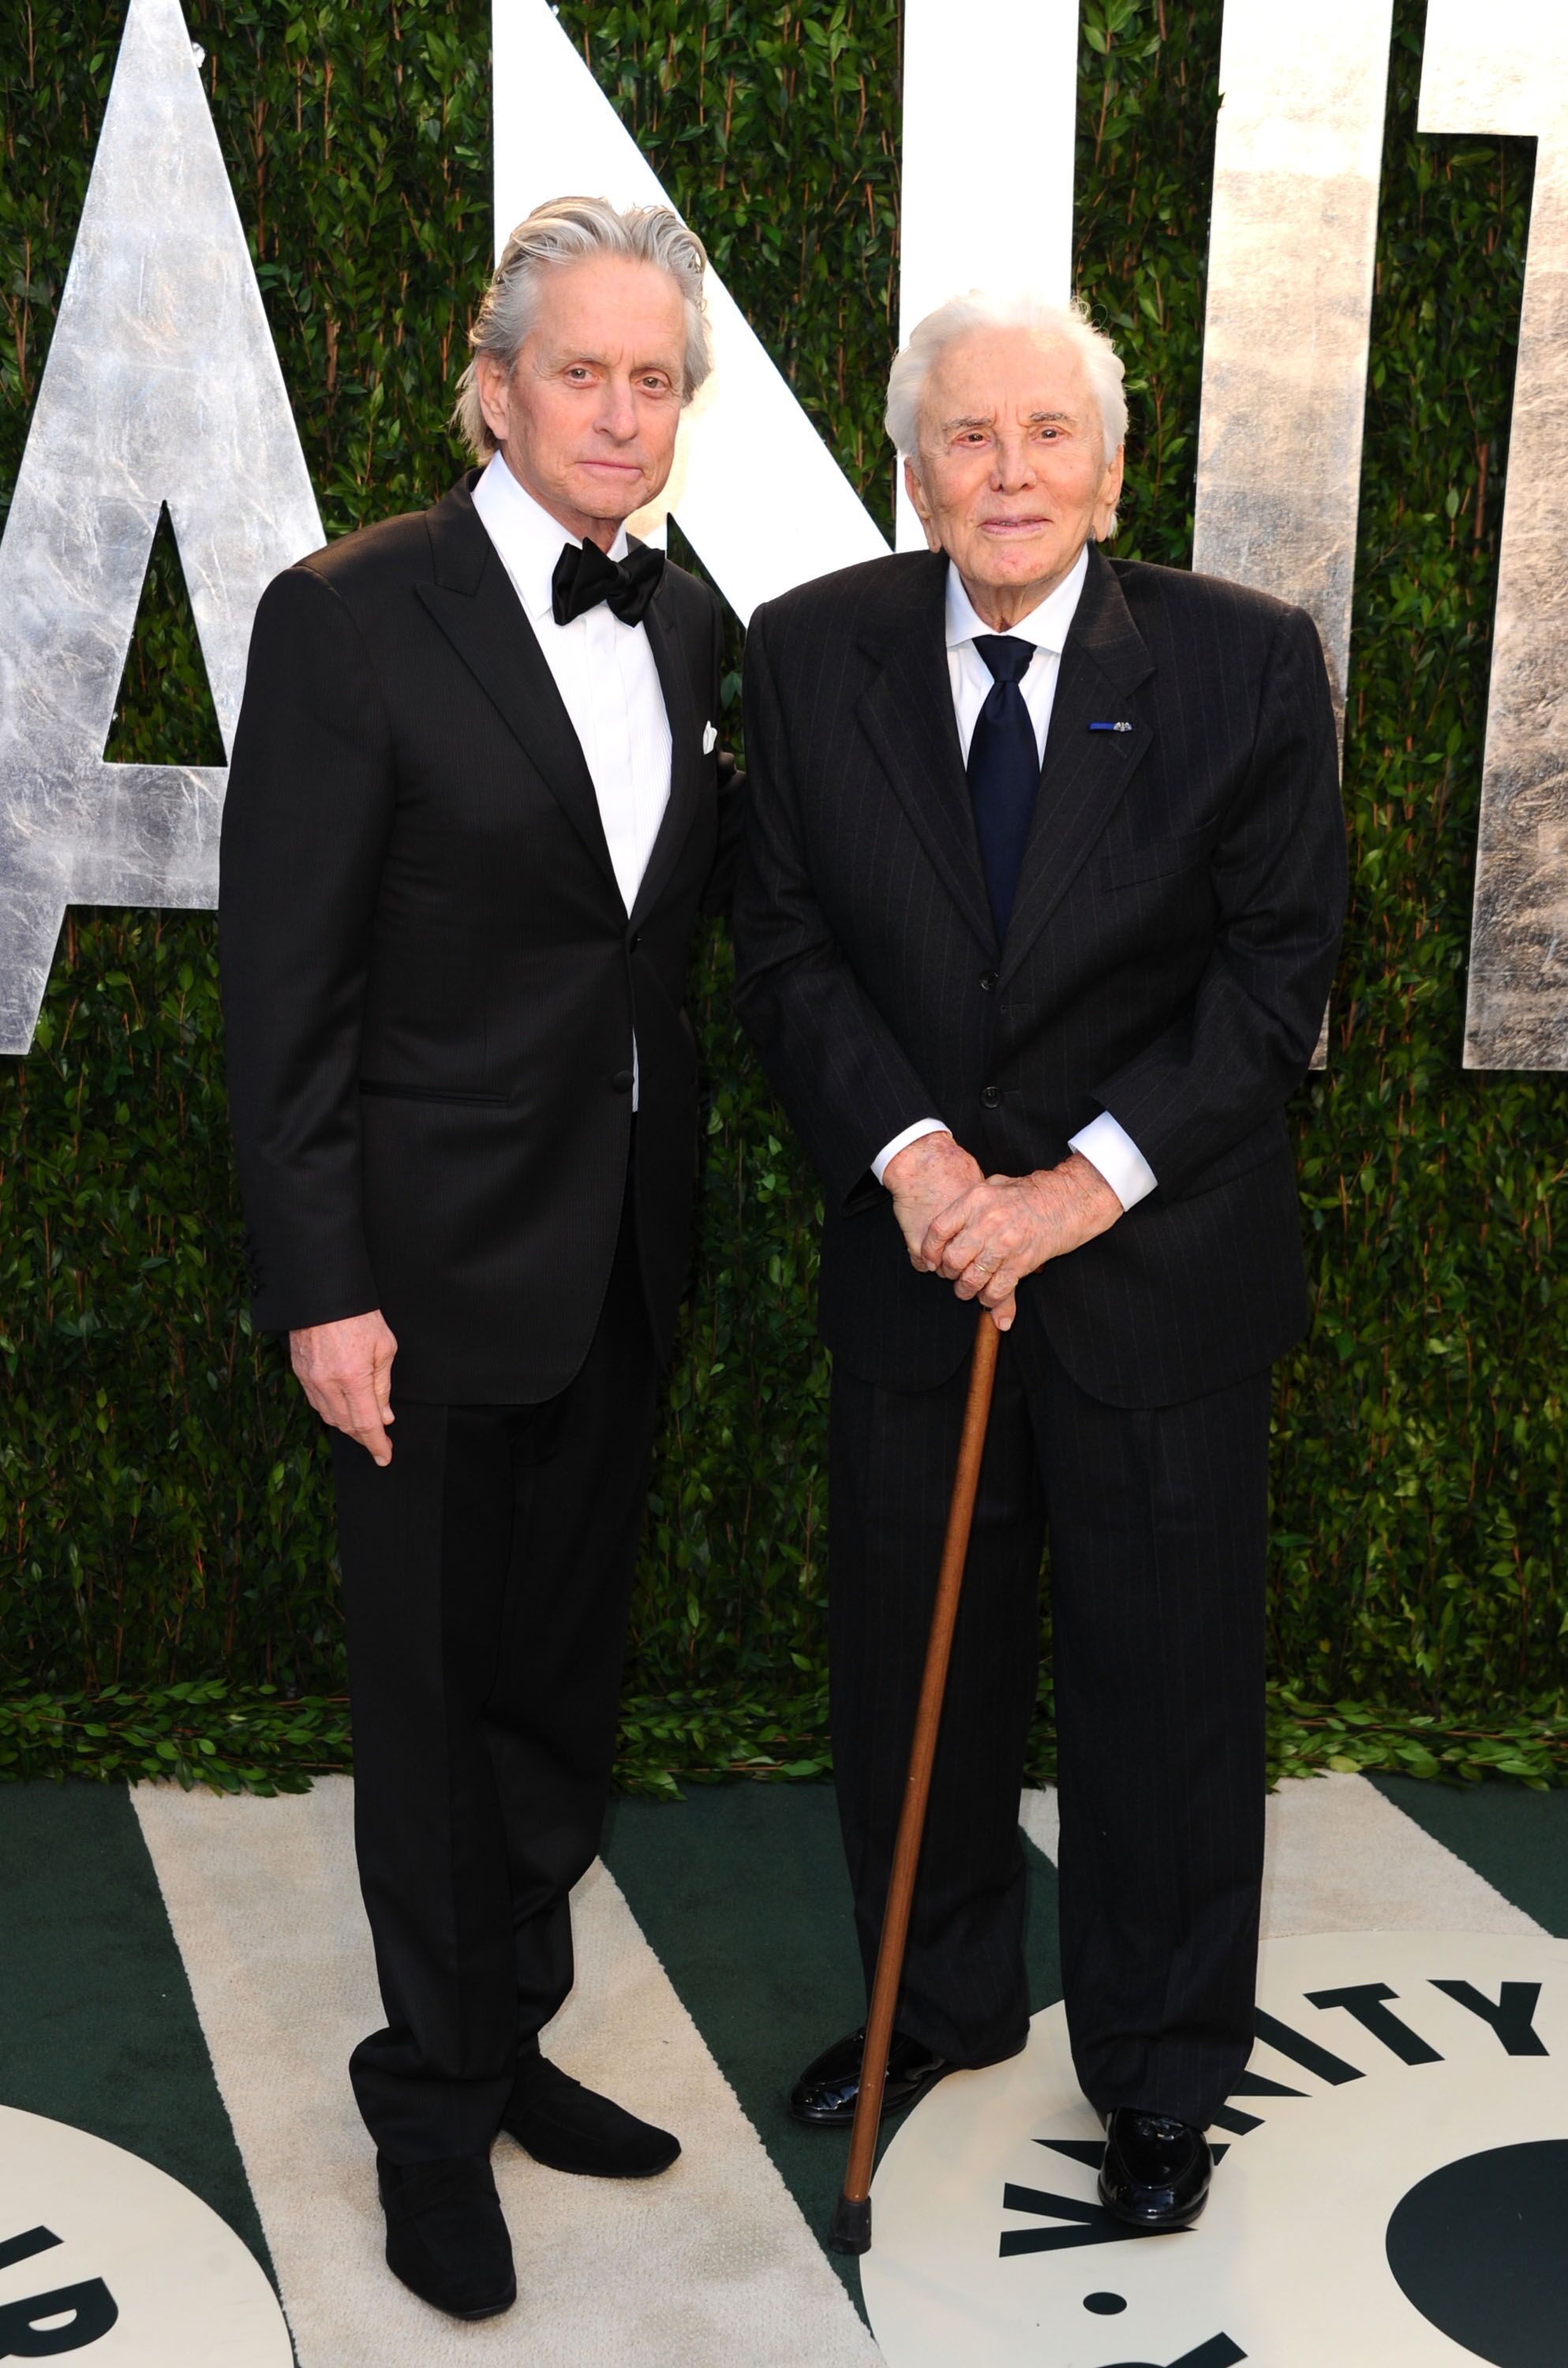 Michael Douglas and Kirk Douglas arrive at the 2012 Vanity Fair Oscar Party. | Source: Getty Images